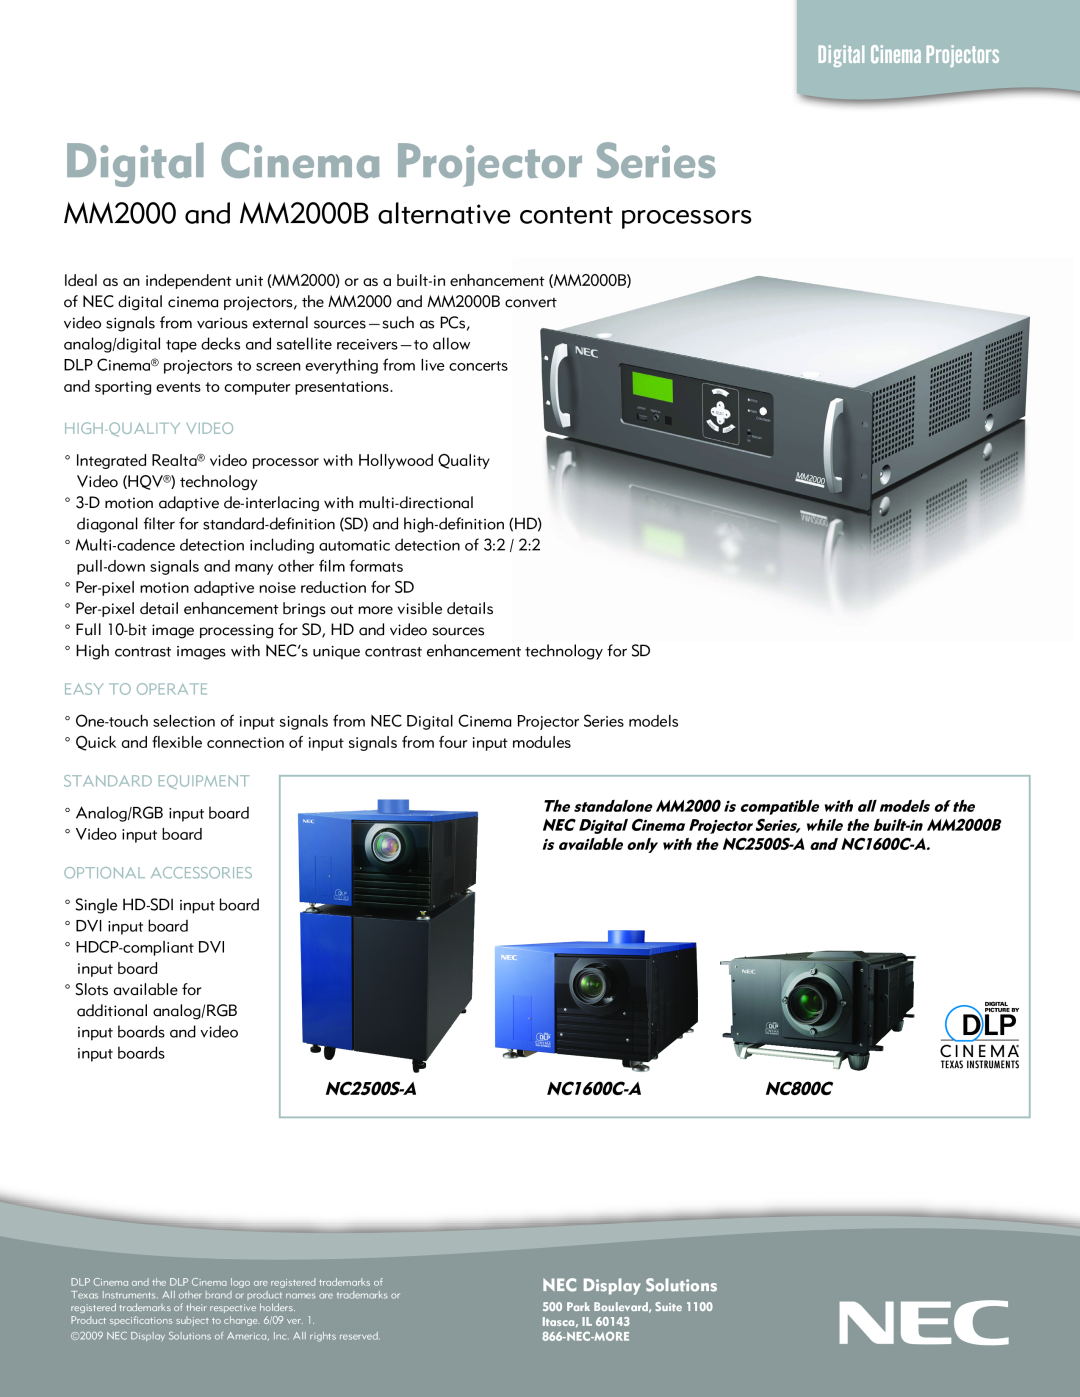 NEC specifications Digital Cinema Projector Series, MM2000 and MM2000B alternative content processors, NC2500S-A 